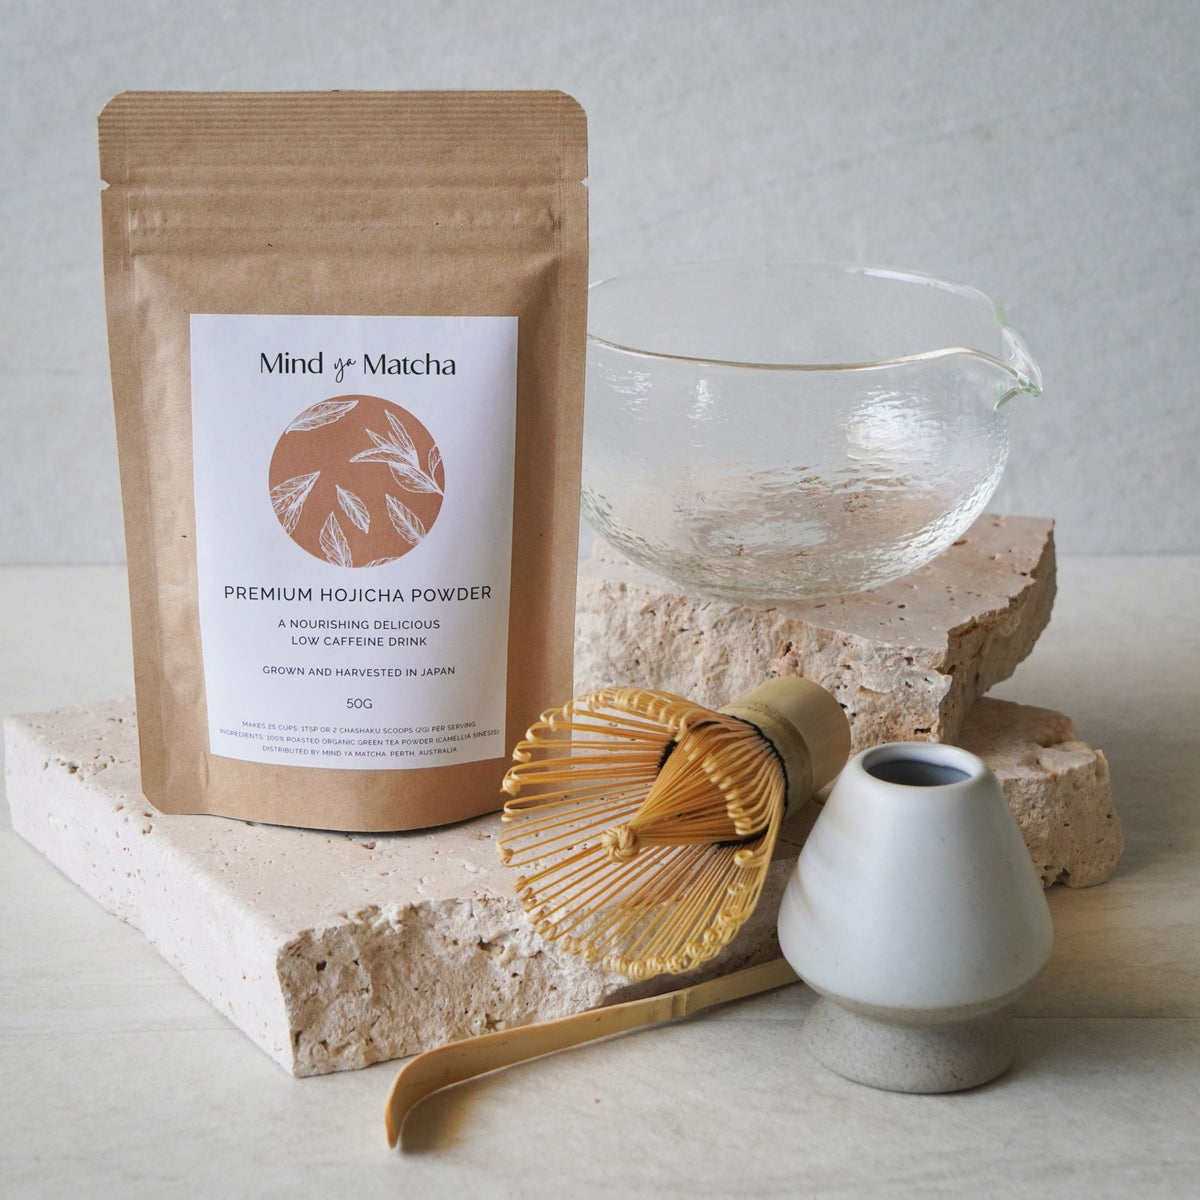 premium houjicha powder grown and harvested in japan bundle with bamboo whisk, bamboo spoon, glass bowl and whisk holder